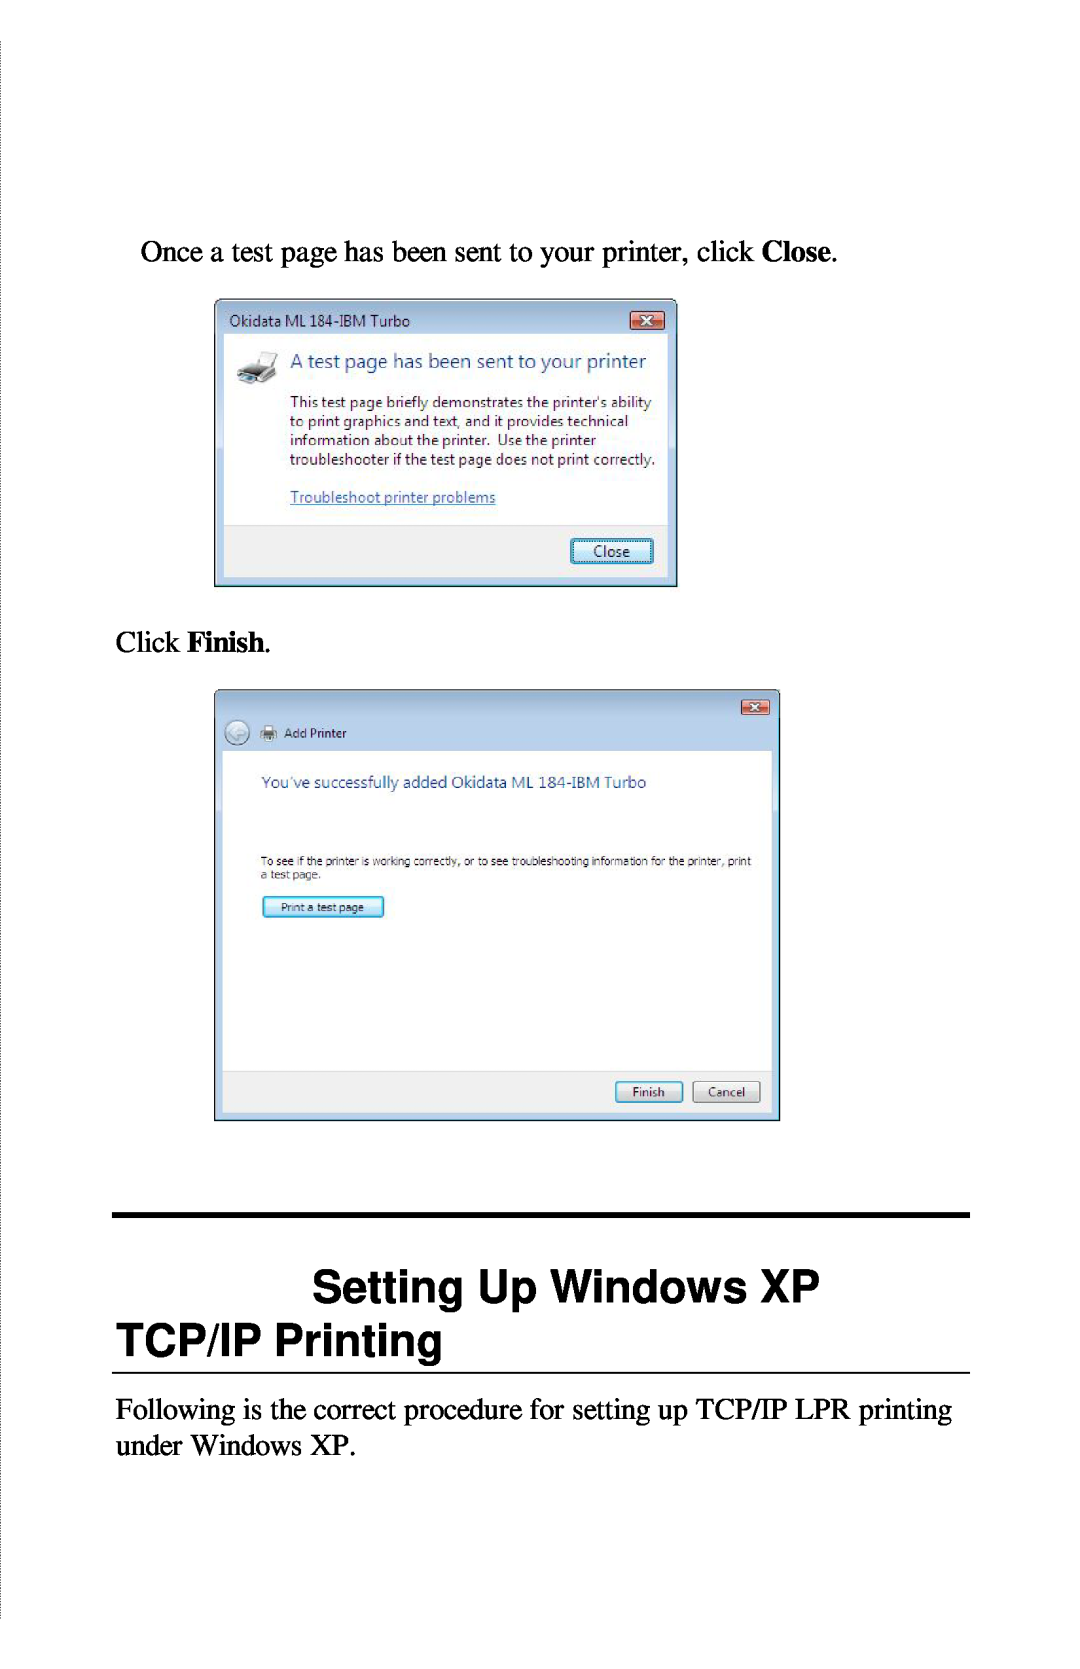 TRENDnet TE100-PIP Setting Up Windows XP TCP/IP Printing, Once a test page has been sent to your printer, click Close 